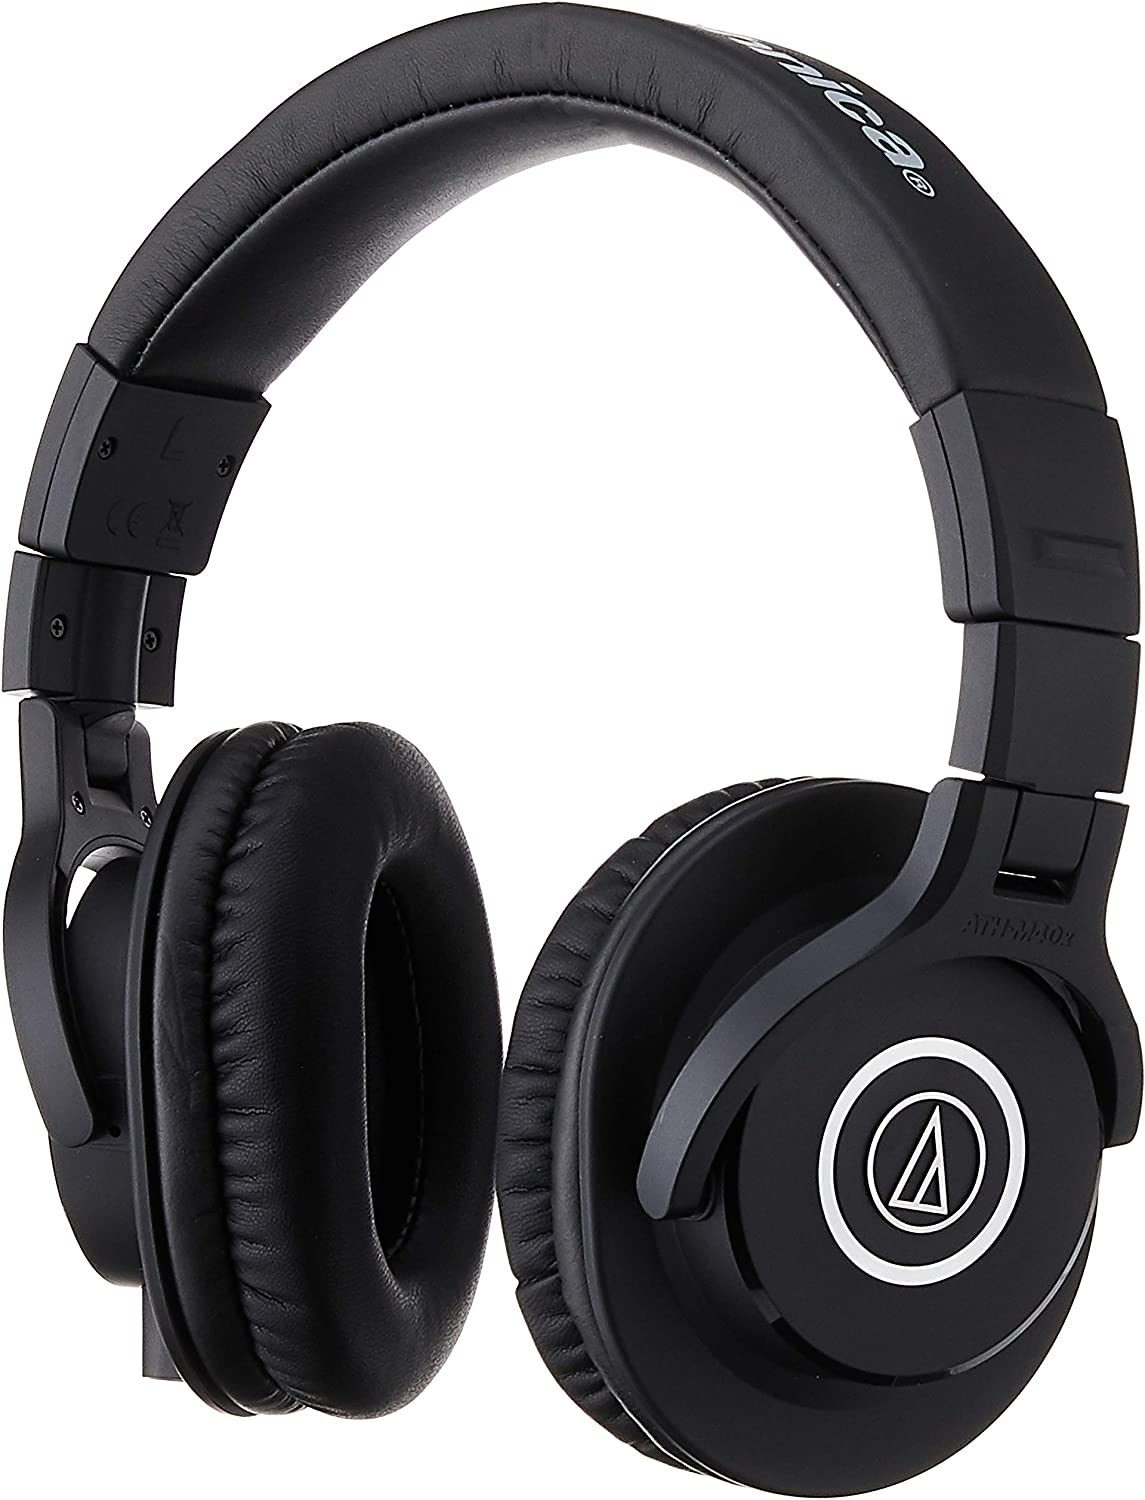 Audio-Technica ATH-M40x Professional Studio Monitor Headphone, Black, with Cutting Edge Engineering, 90 Degree Swiveling Earcups, Pro-grade Earpads Headband, Detachable Cables Included